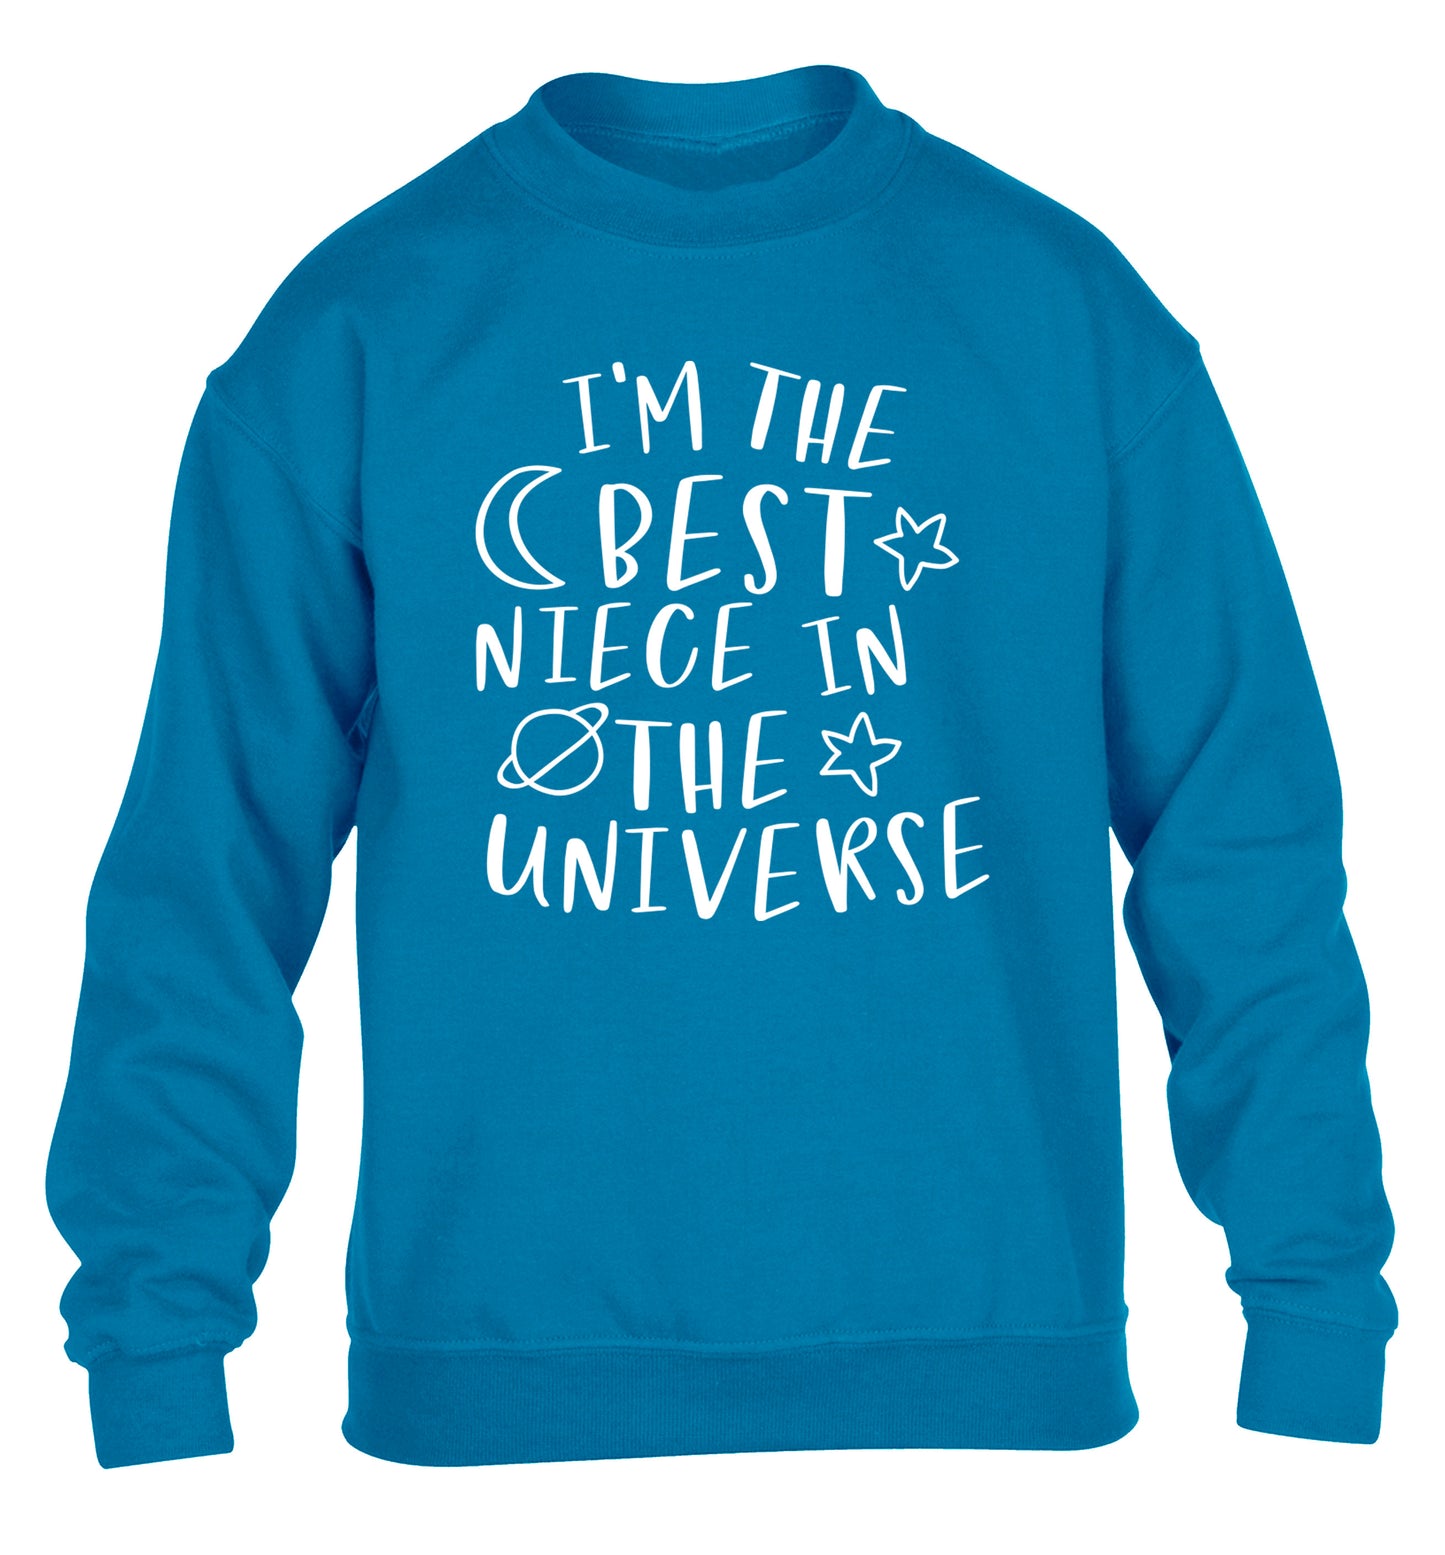 I'm the best niece in the universe children's blue sweater 12-13 Years